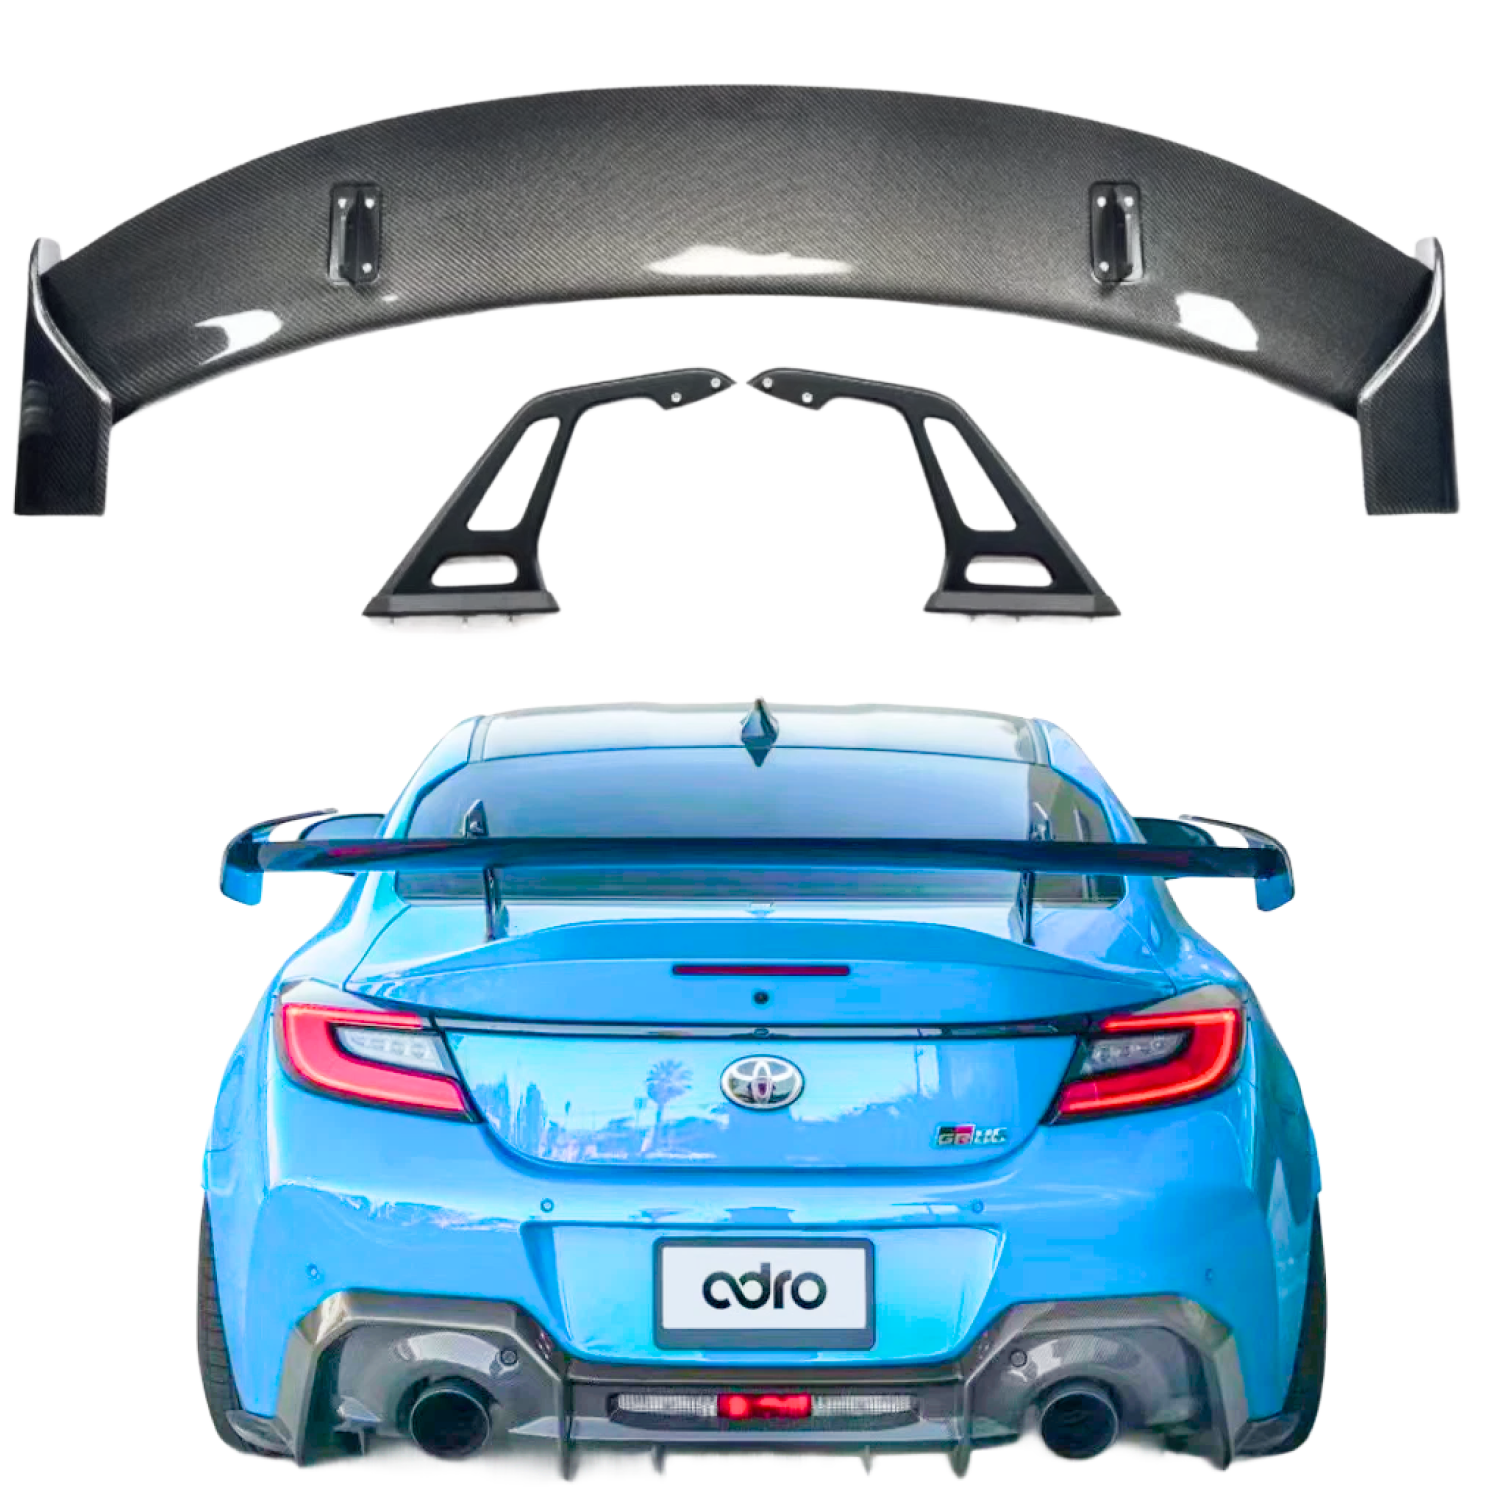 Swan neck wing 2012 Toyota GT86 real carbon fiber 